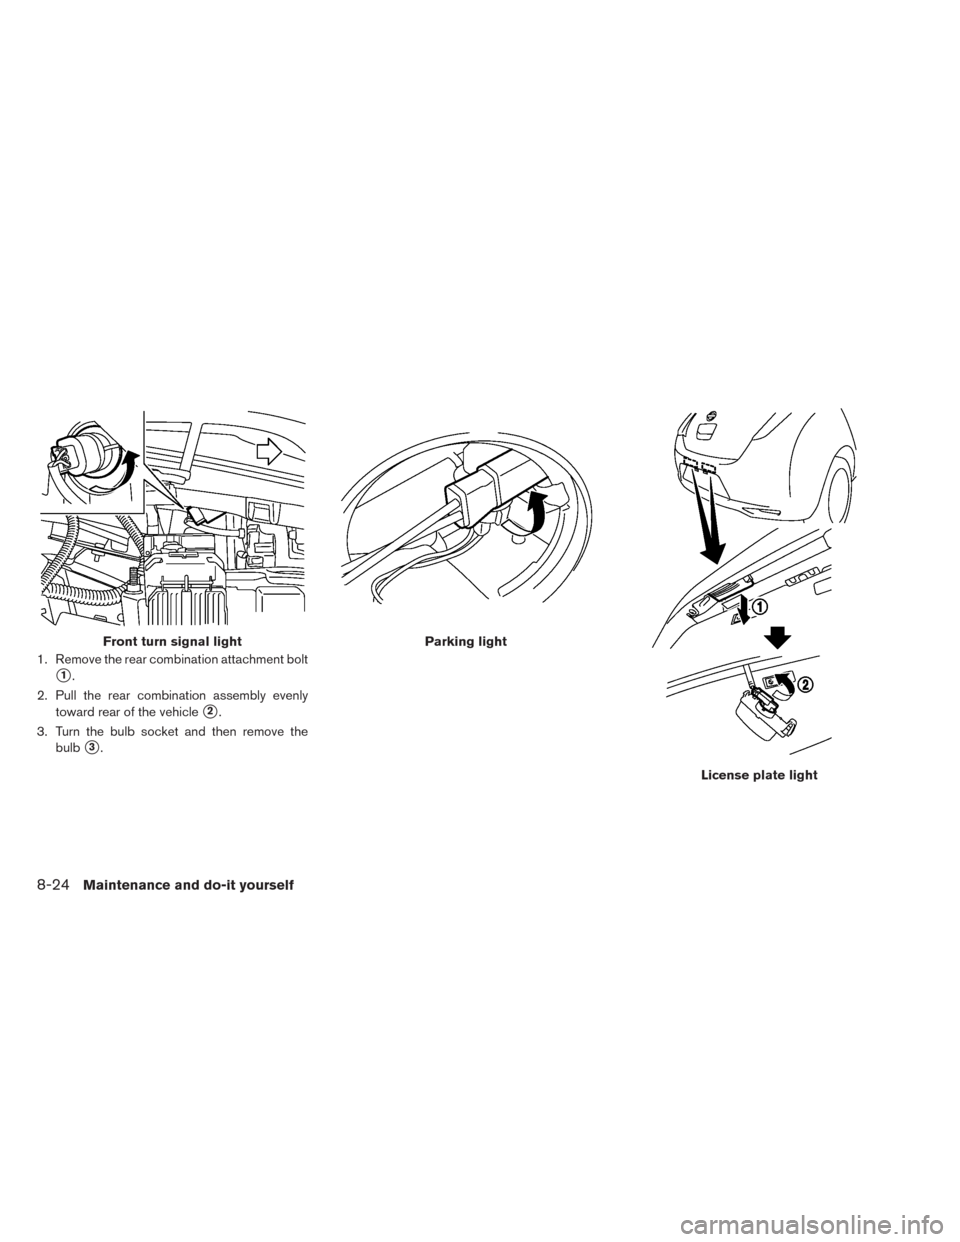 NISSAN LEAF 2014 1.G Owners Manual 1. Remove the rear combination attachment bolt
1.
2. Pull the rear combination assembly evenly
toward rear of the vehicle
2.
3. Turn the bulb socket and then remove the
bulb
3.
Front turn signal li